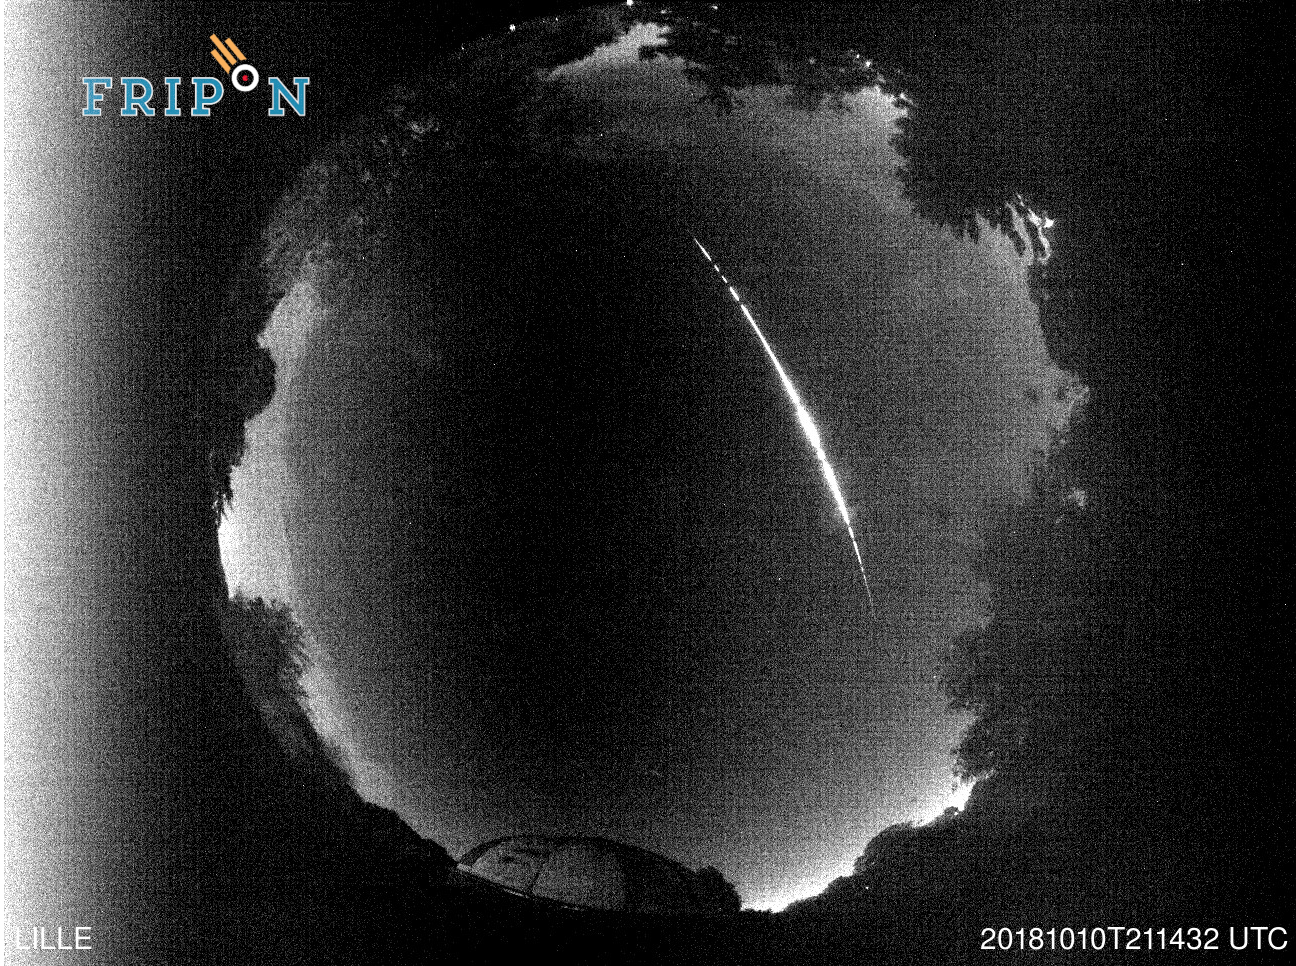 FRIPON Image of Belgian Fireball from Lille